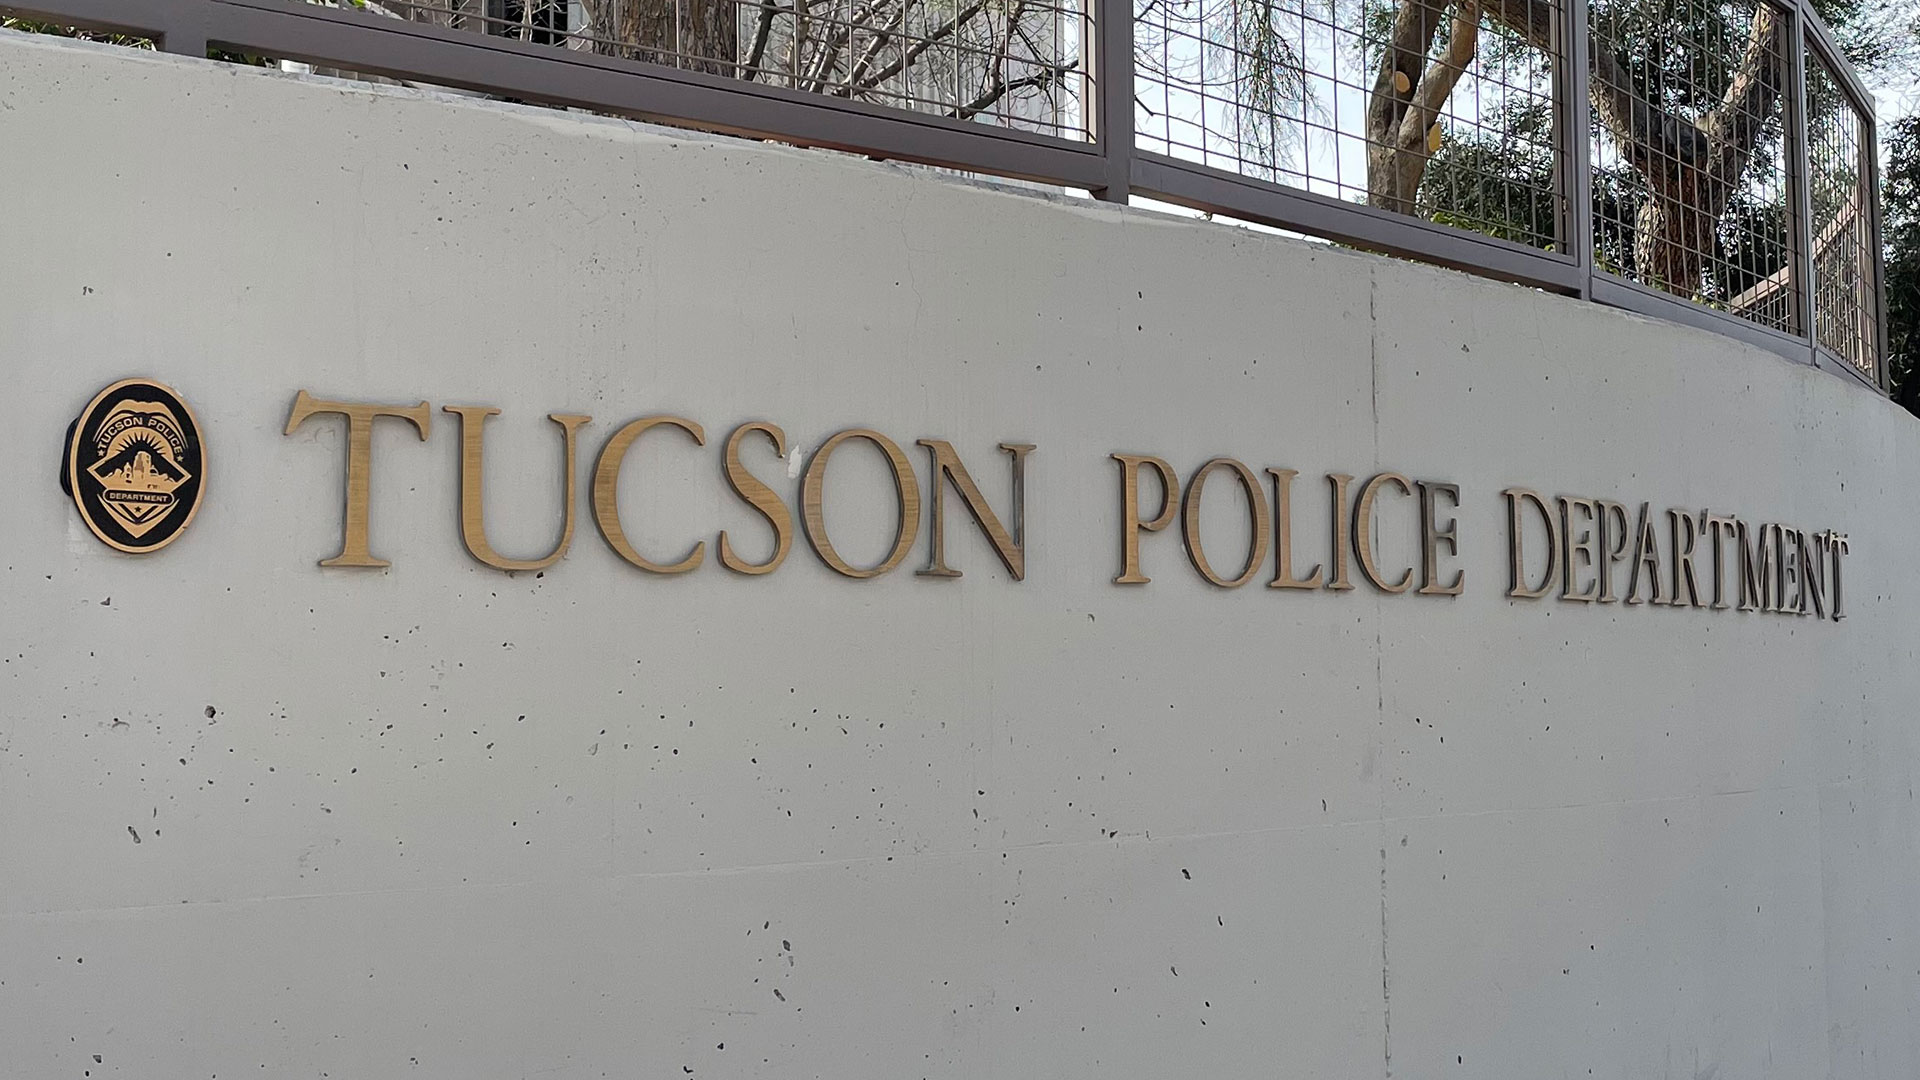 The Tucson Police Department, like many others around the country, is actively trying to find qualified applicants who want to join the force. 